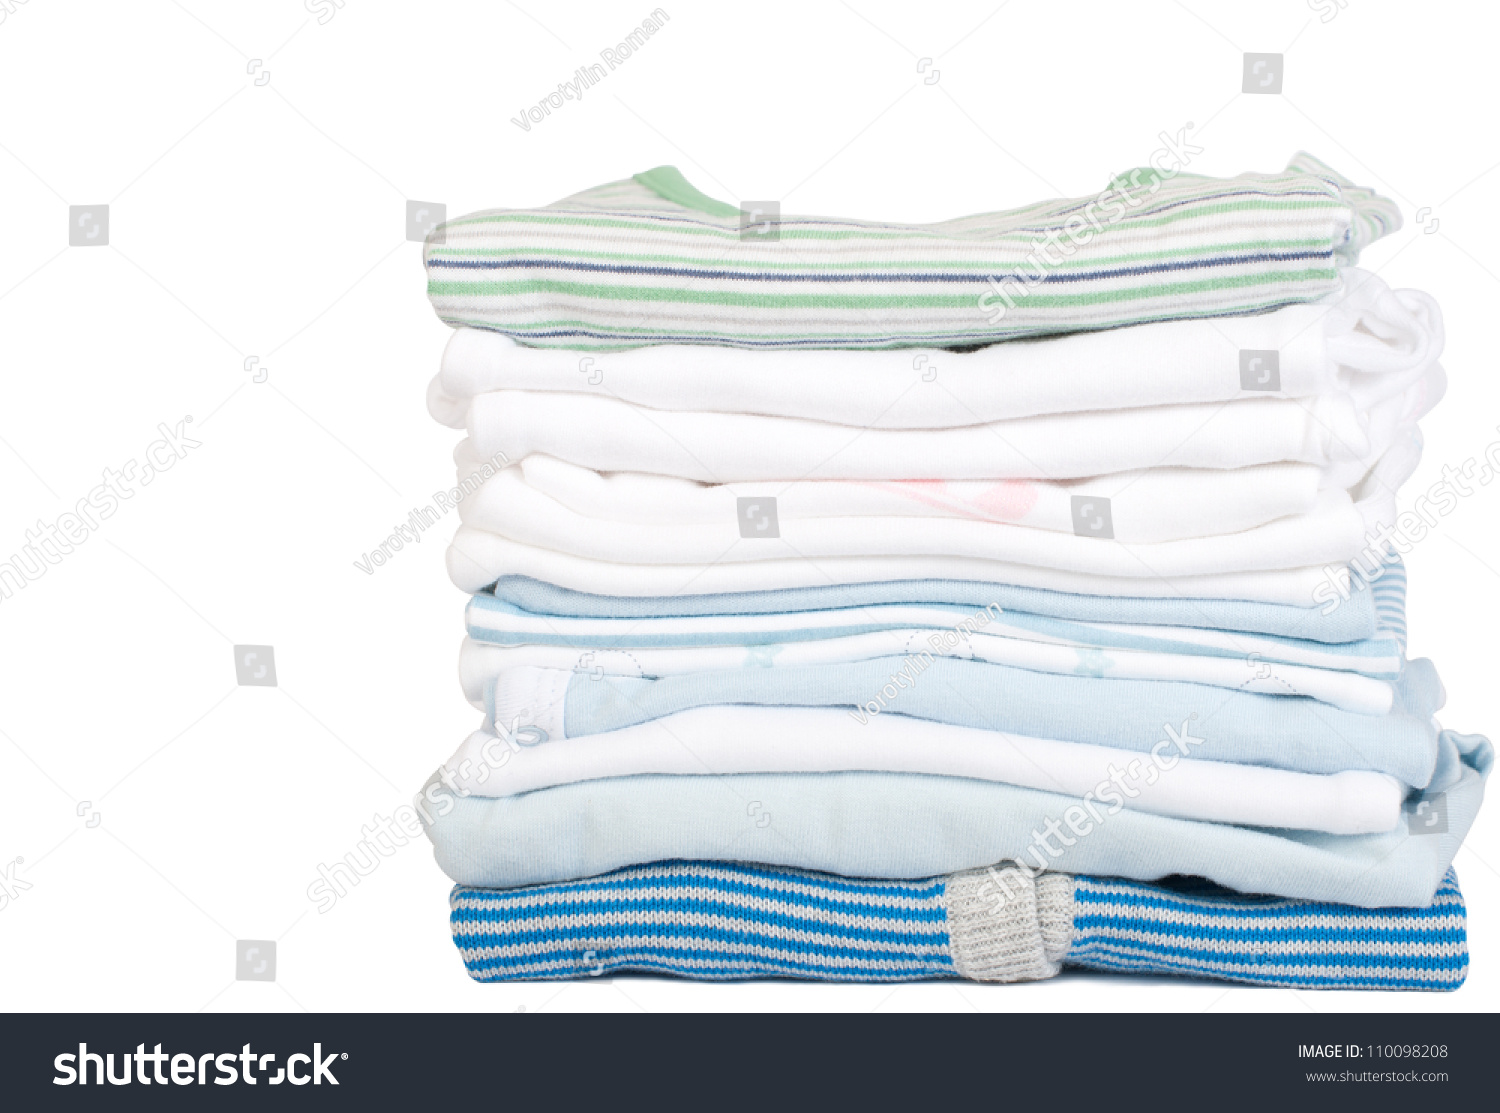 a stack of baby clothes on a white background with copy space #110098208